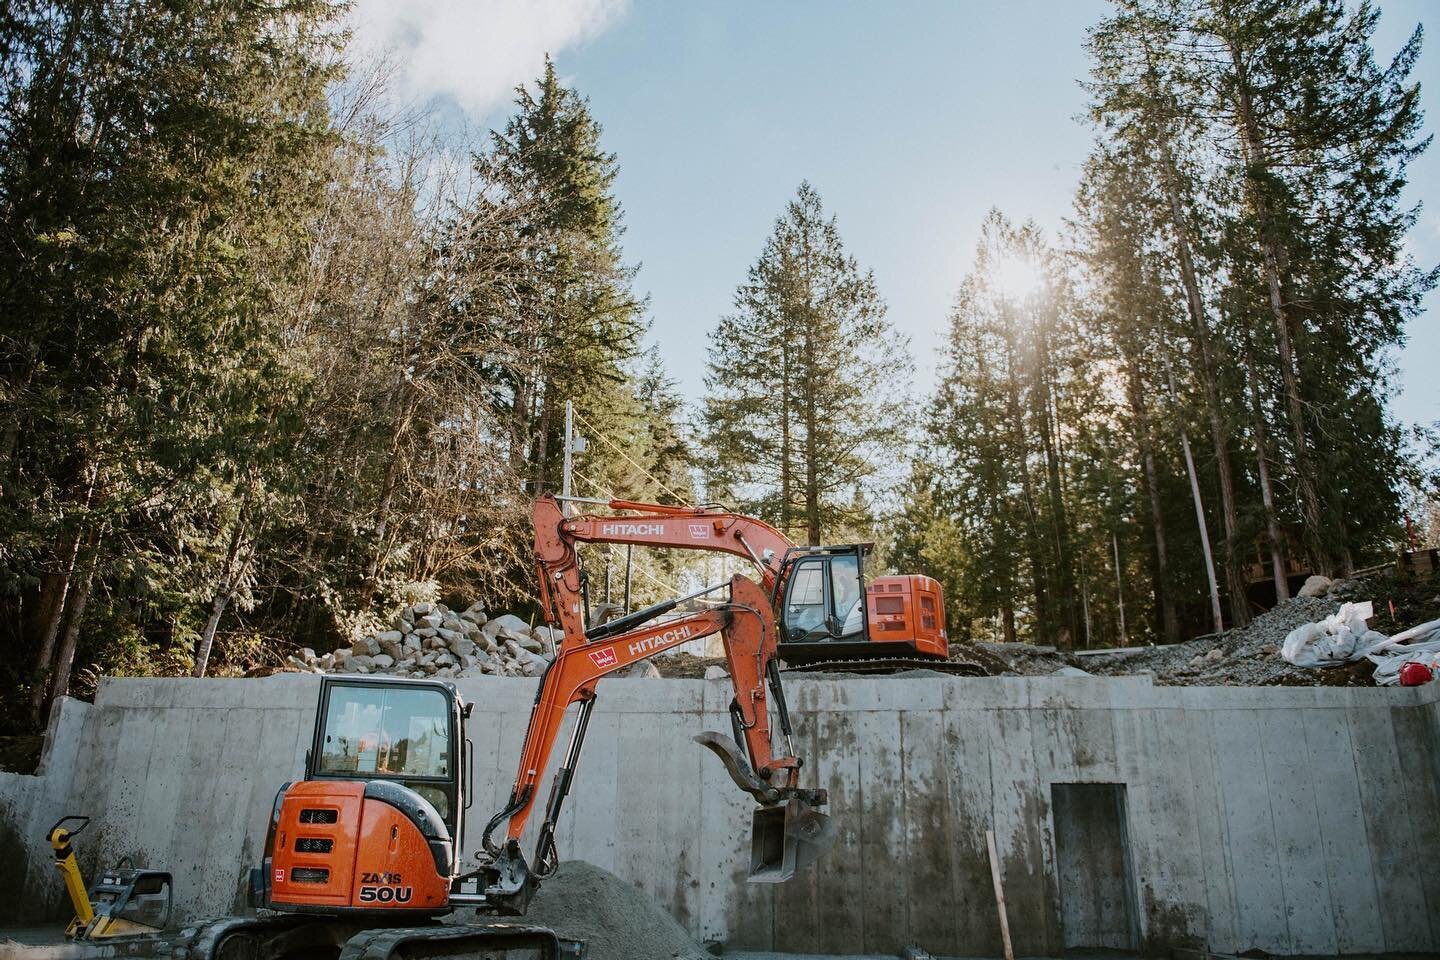 Backfilling one of our latest projects with this duo
&bull;
&bull;
#teamwork
#sunshinecoastbc
#excavation
#hitachi
#excavator
#lehigh
#dumptruck
#sechelt
#madeirapark
#building 📸: @courtneymunson_